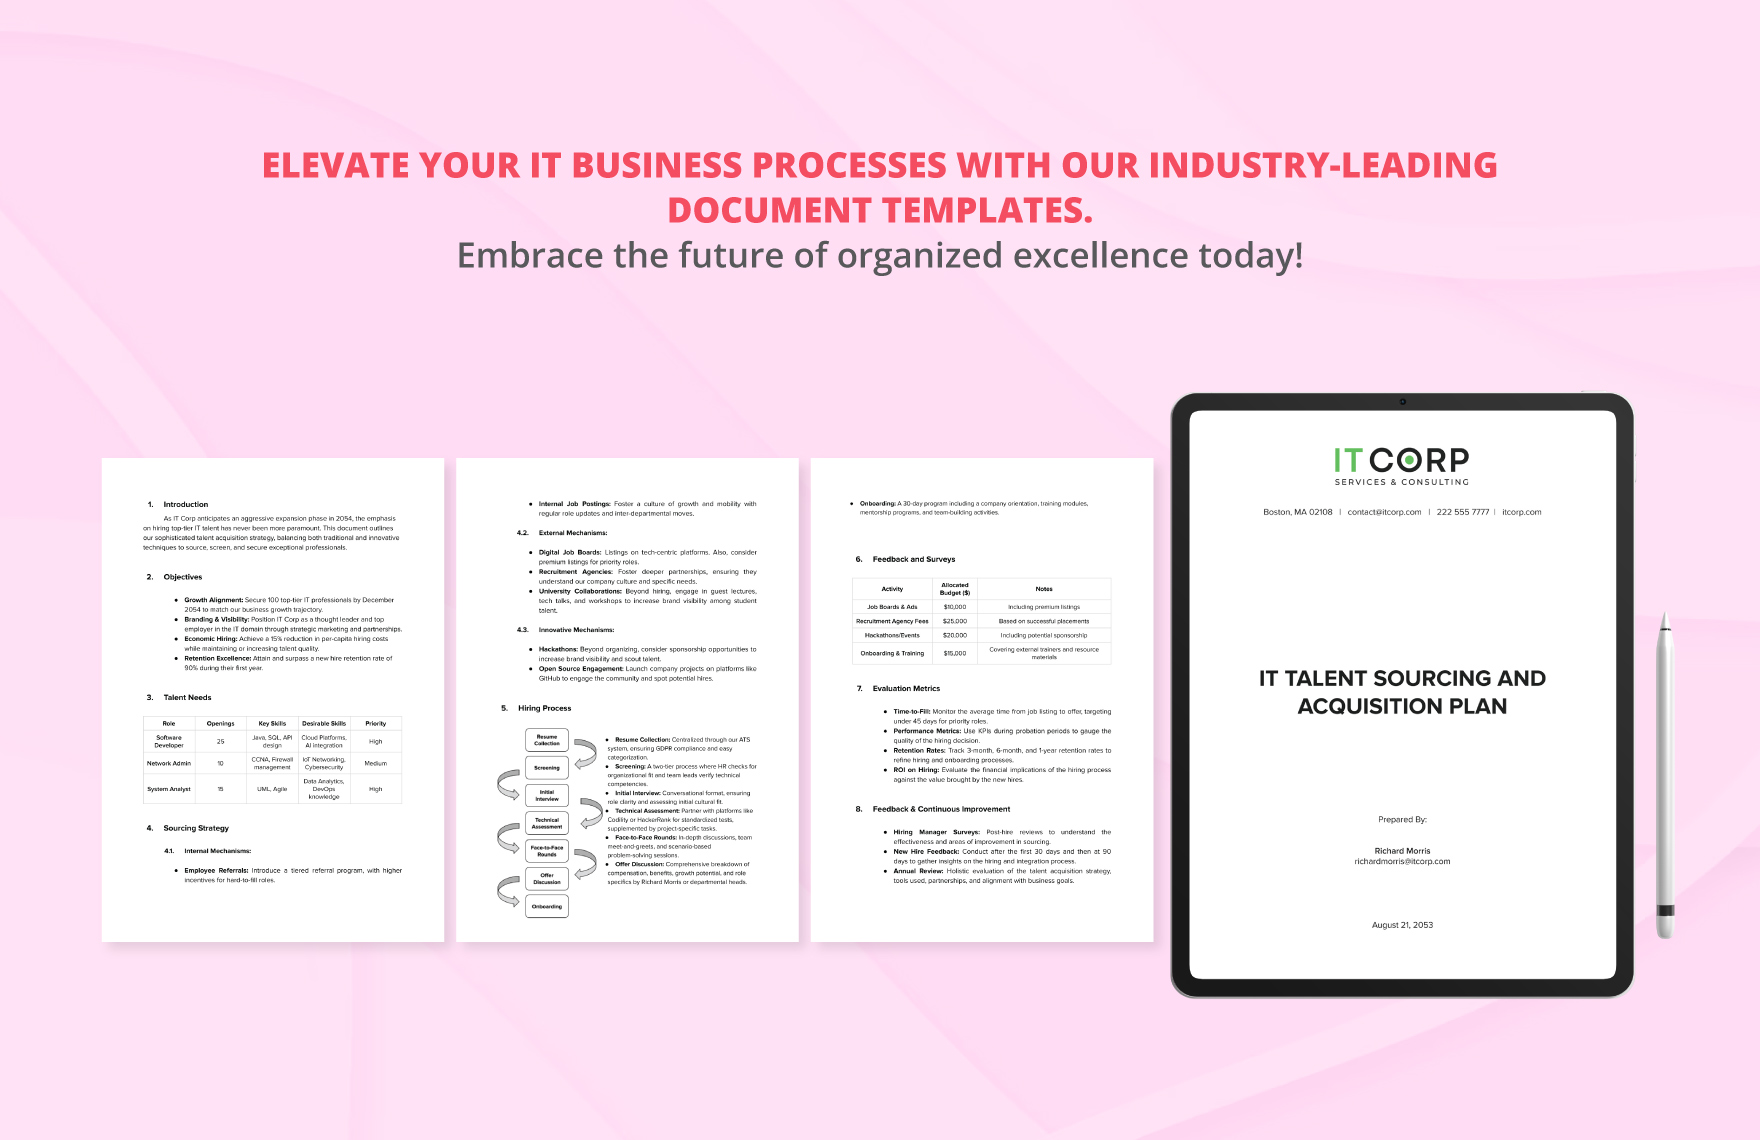 IT Talent Sourcing and Acquisition Plan Template